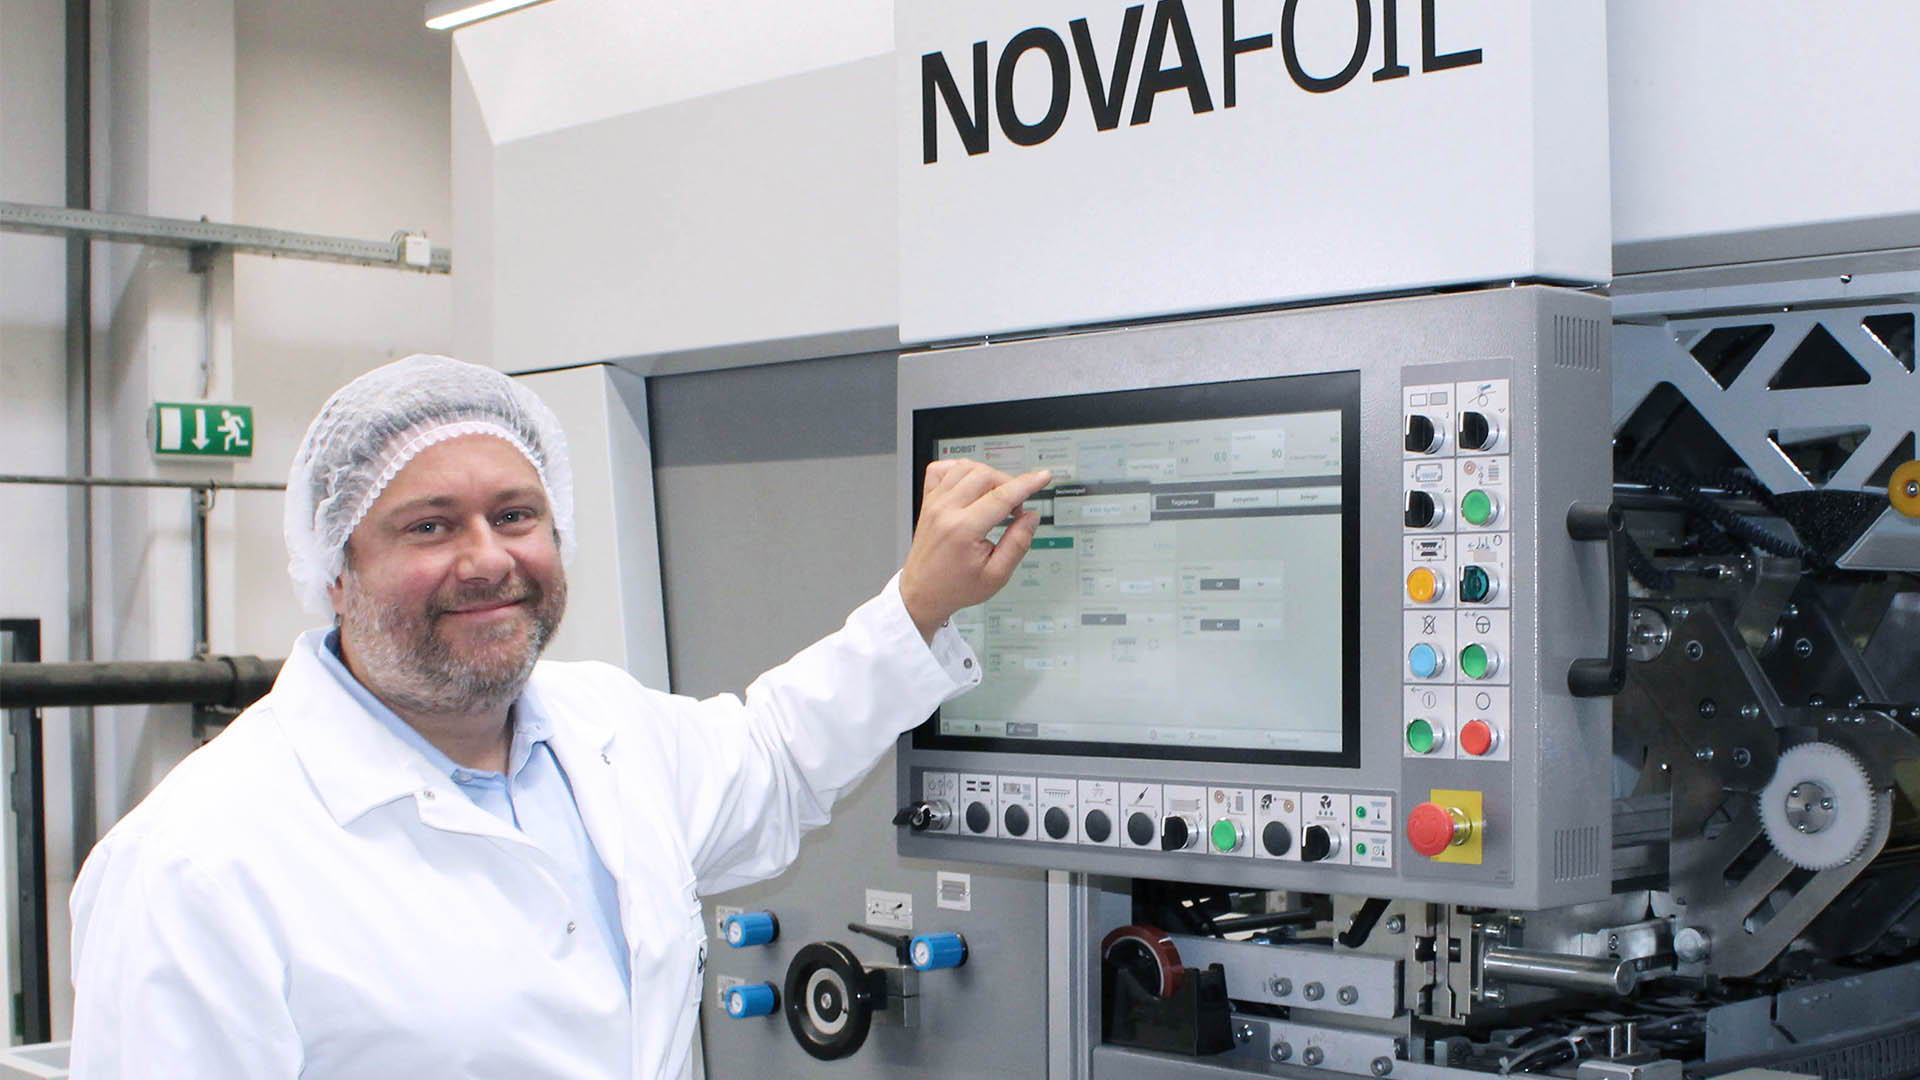 Johannes Knapp shows how easy it is to use the NOVAFOIL 106 through the SPHERE human-machine interface.